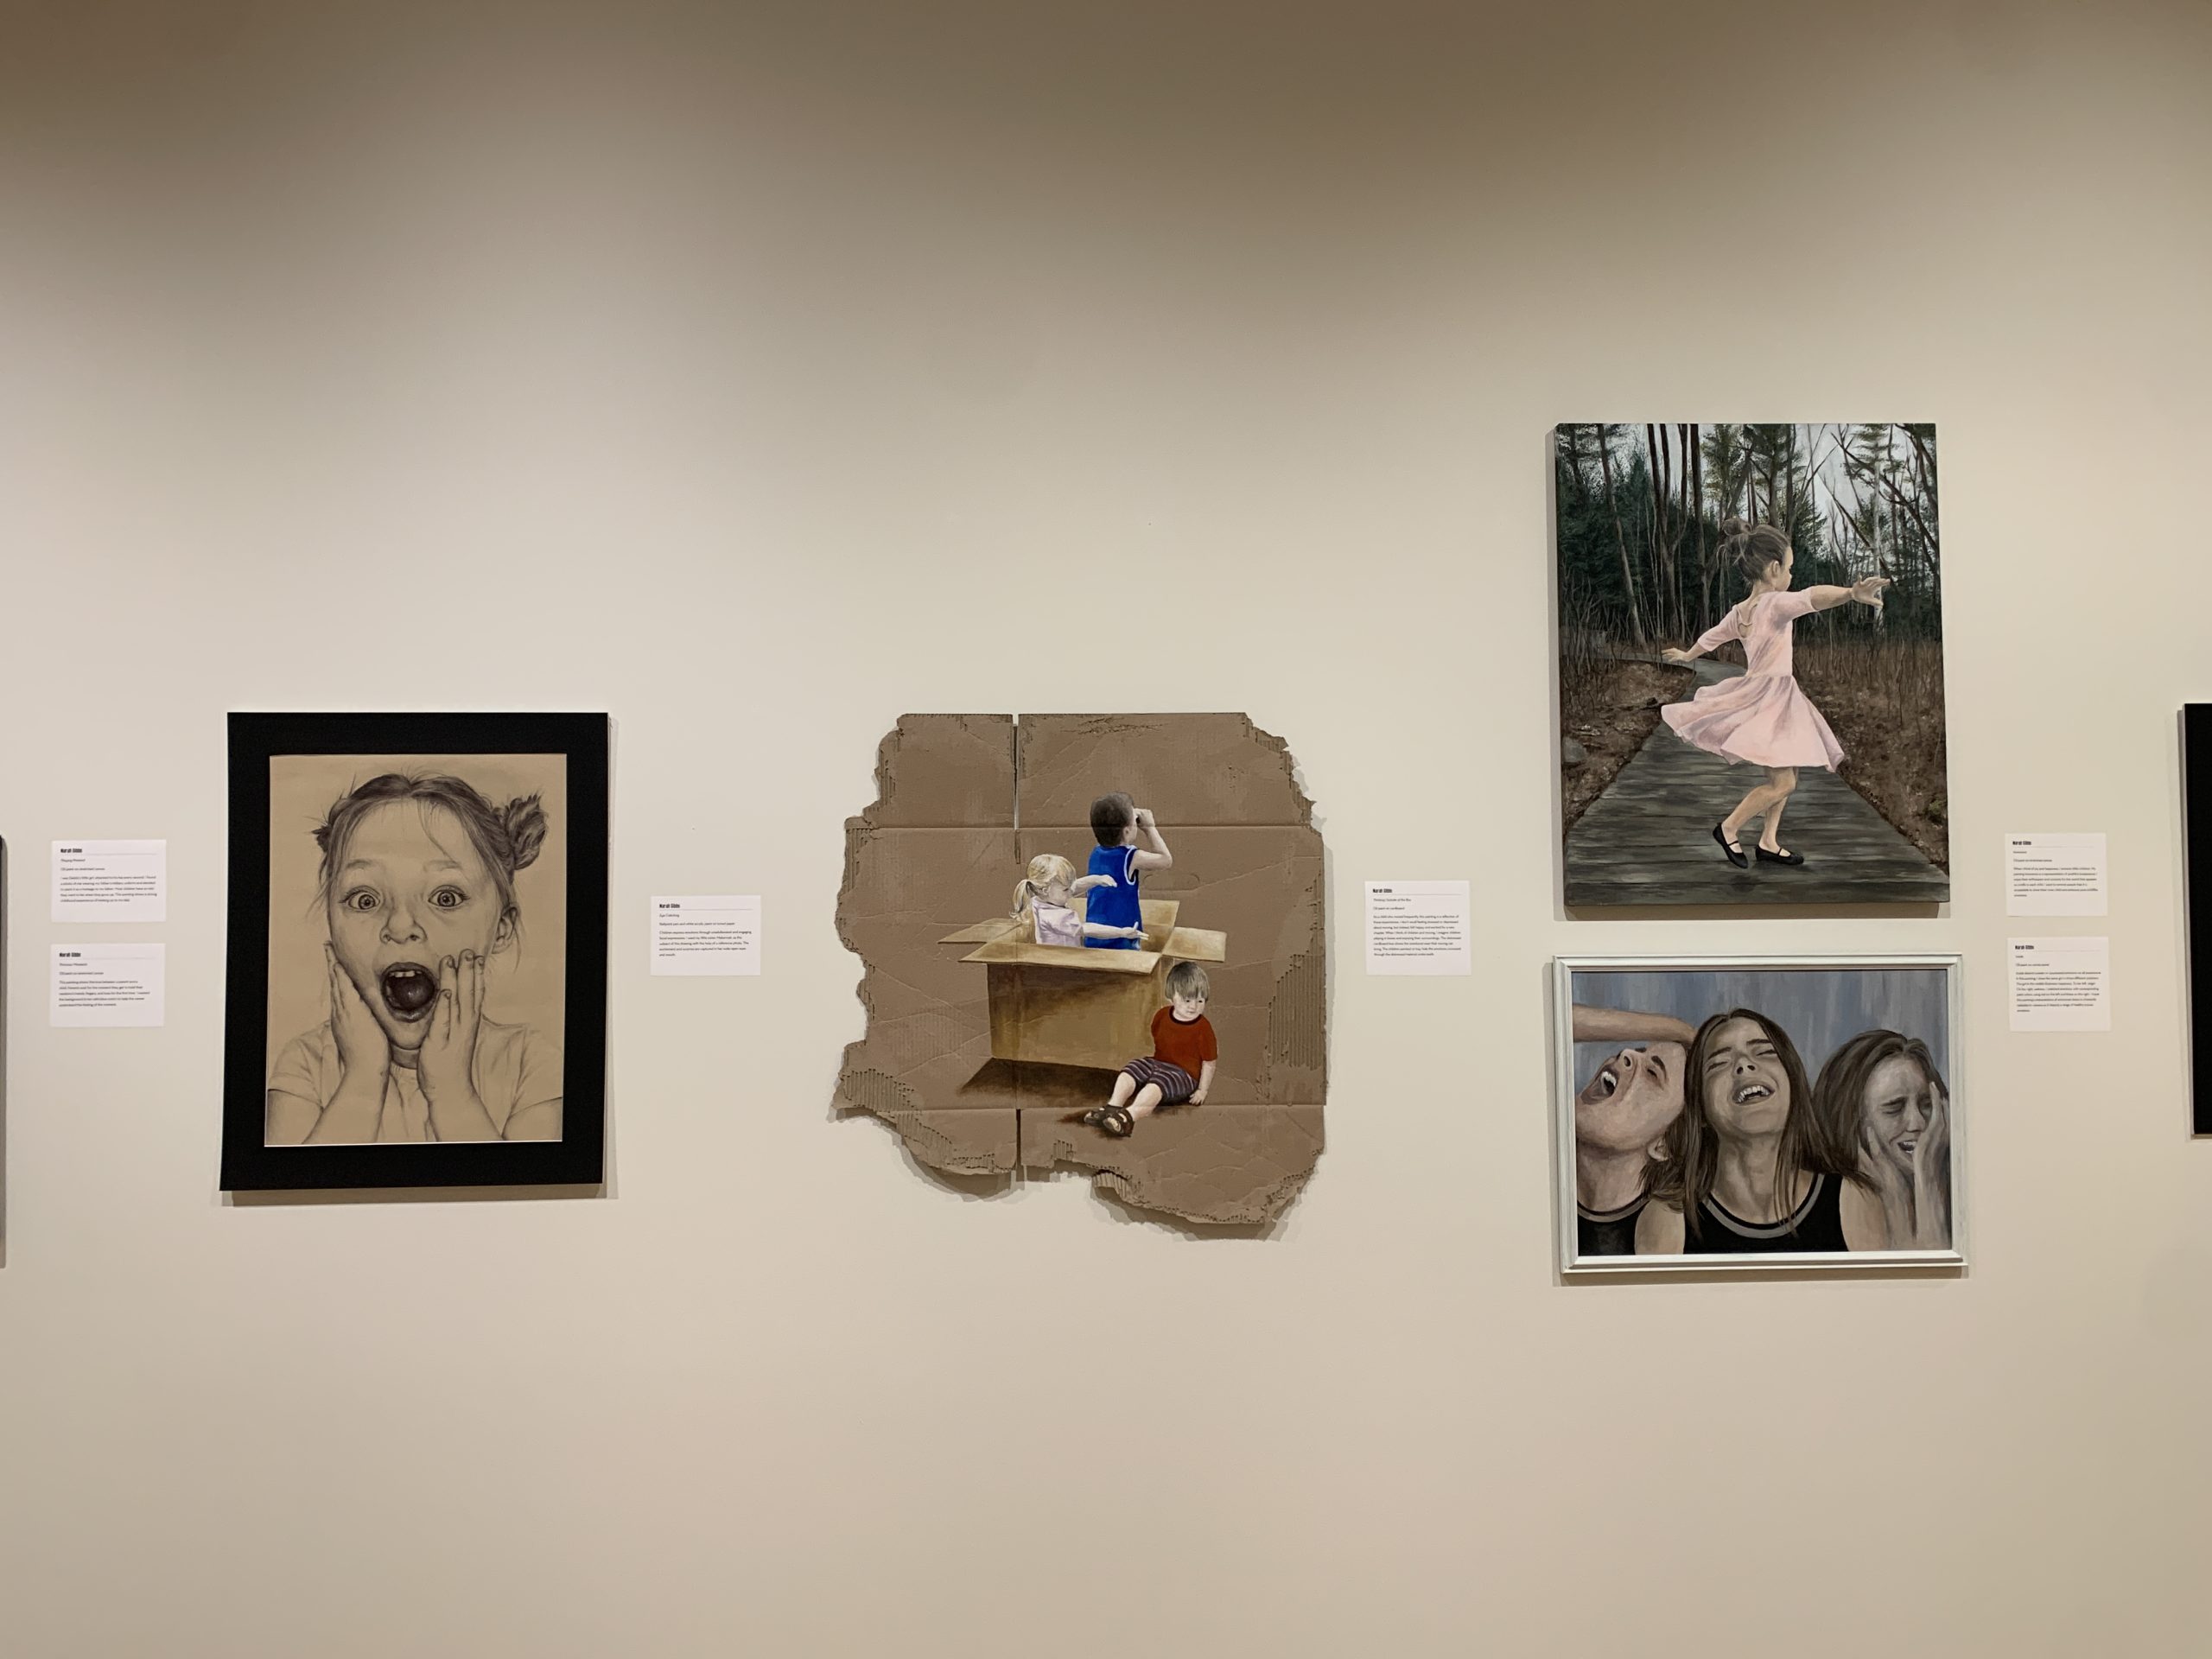 Four drawings and paintings depicting children hang on the gallery wall. A monochromatic drawing of a young girl with a surprised expression hangs to the left of a painting created on cardboard depicting three children playing in a moving box. 